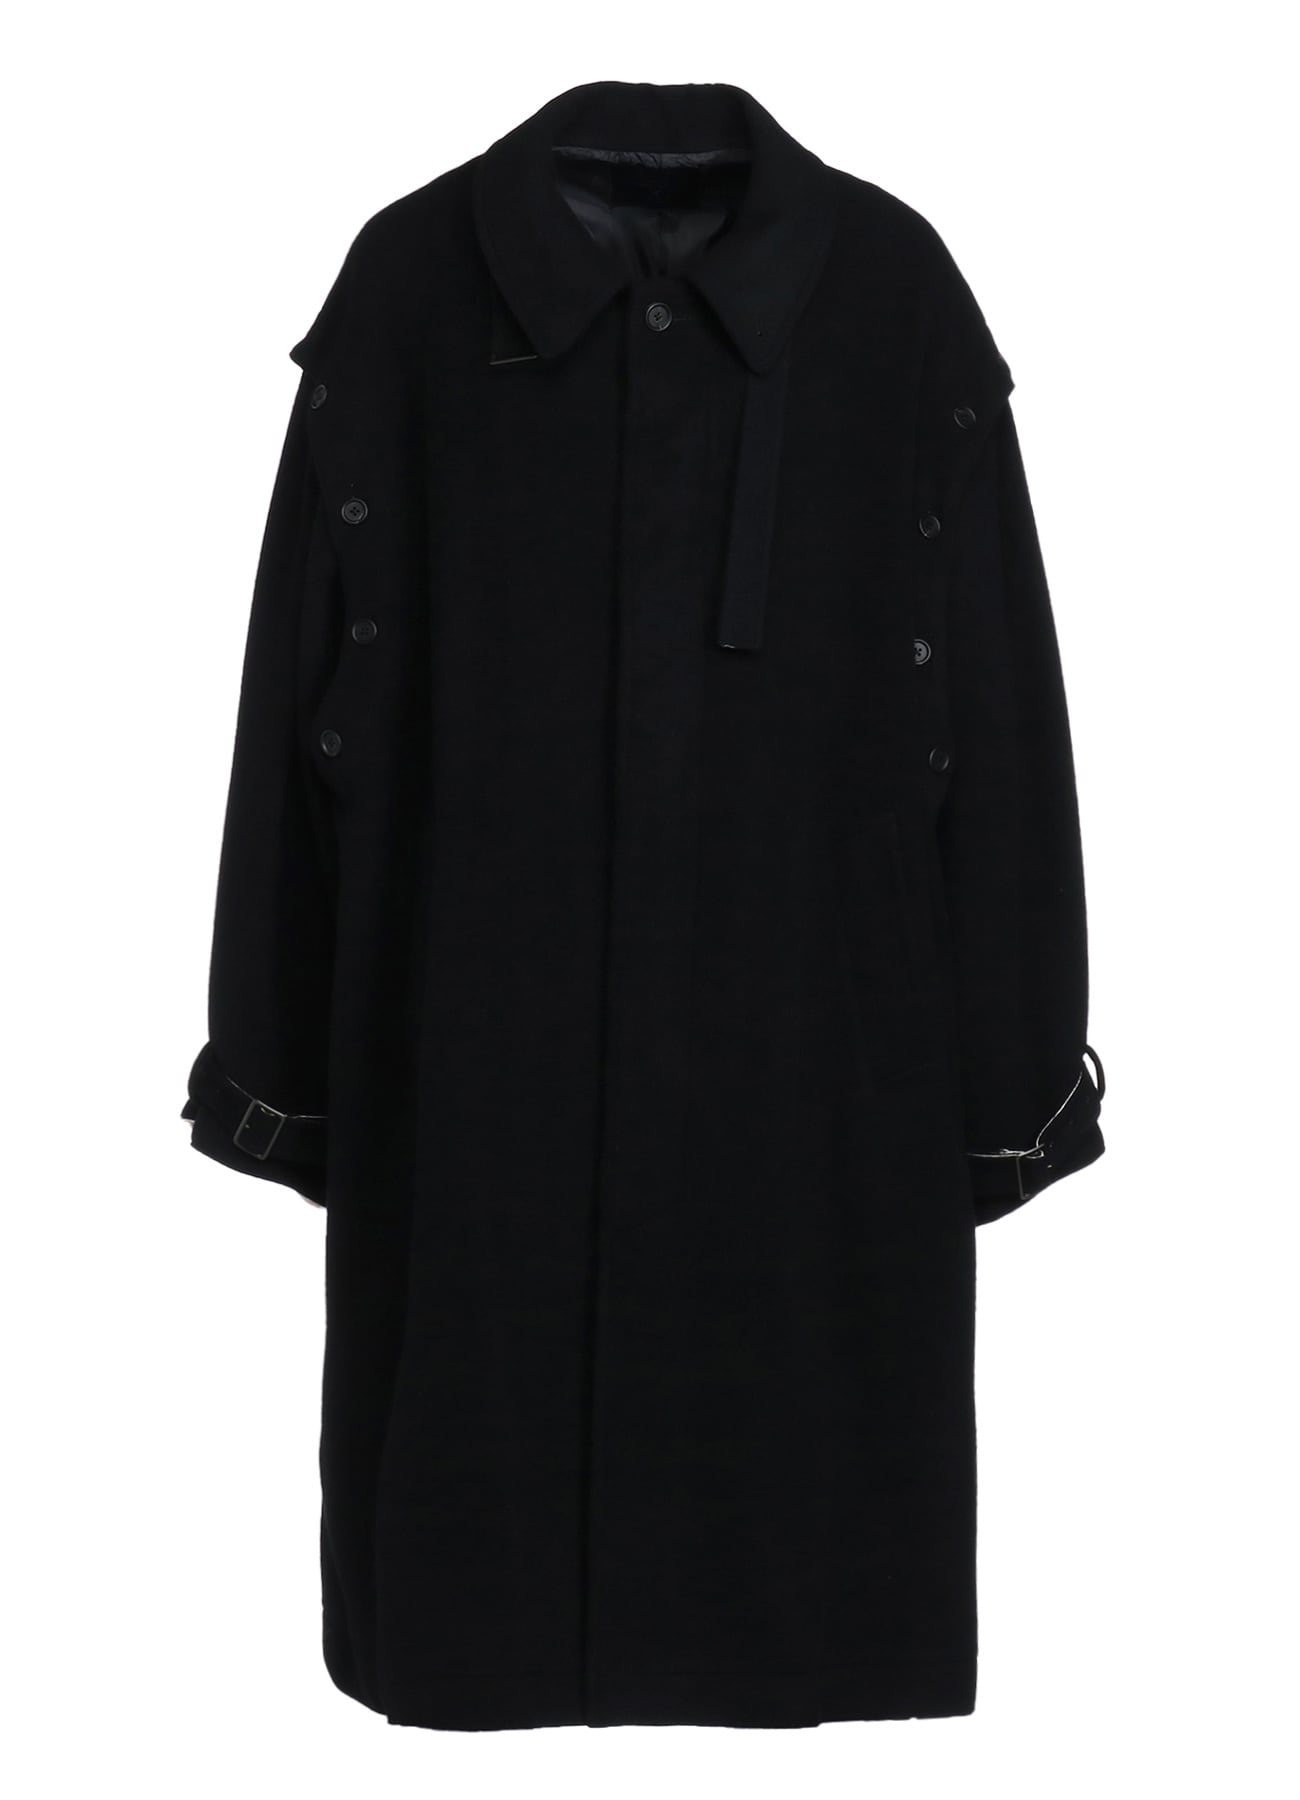 W/TOP MOSSA FLY FRONT LONG COAT WITH REMOVABLE SLEEVES